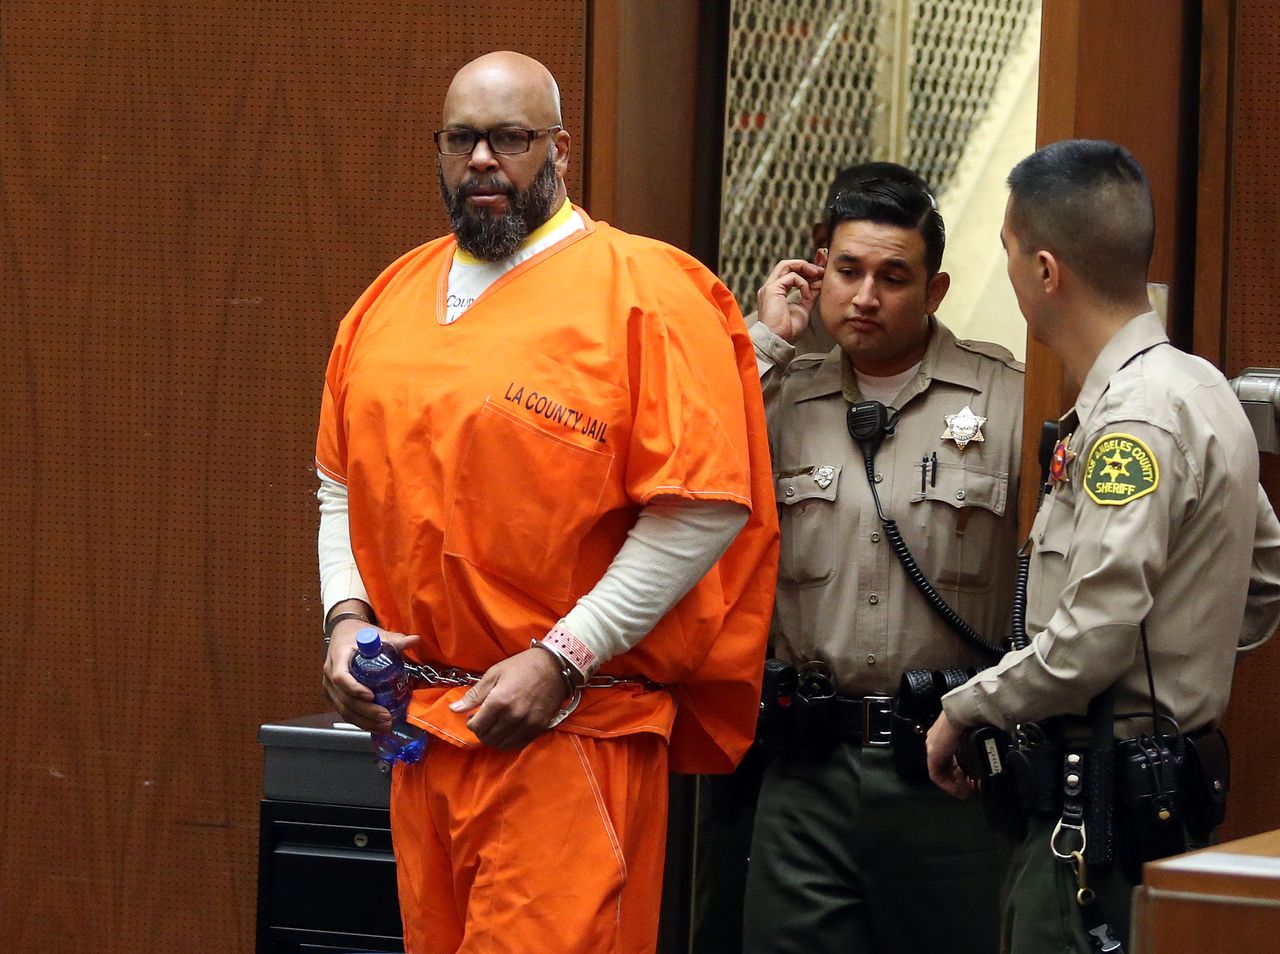 Marion "Suge" Knight appears in Los Angeles court for a pretrial hearing at the Clara Shortridge Foltz Criminal Justice Center on January 21, 2016 in Los Angeles, California. | Source: Getty Images